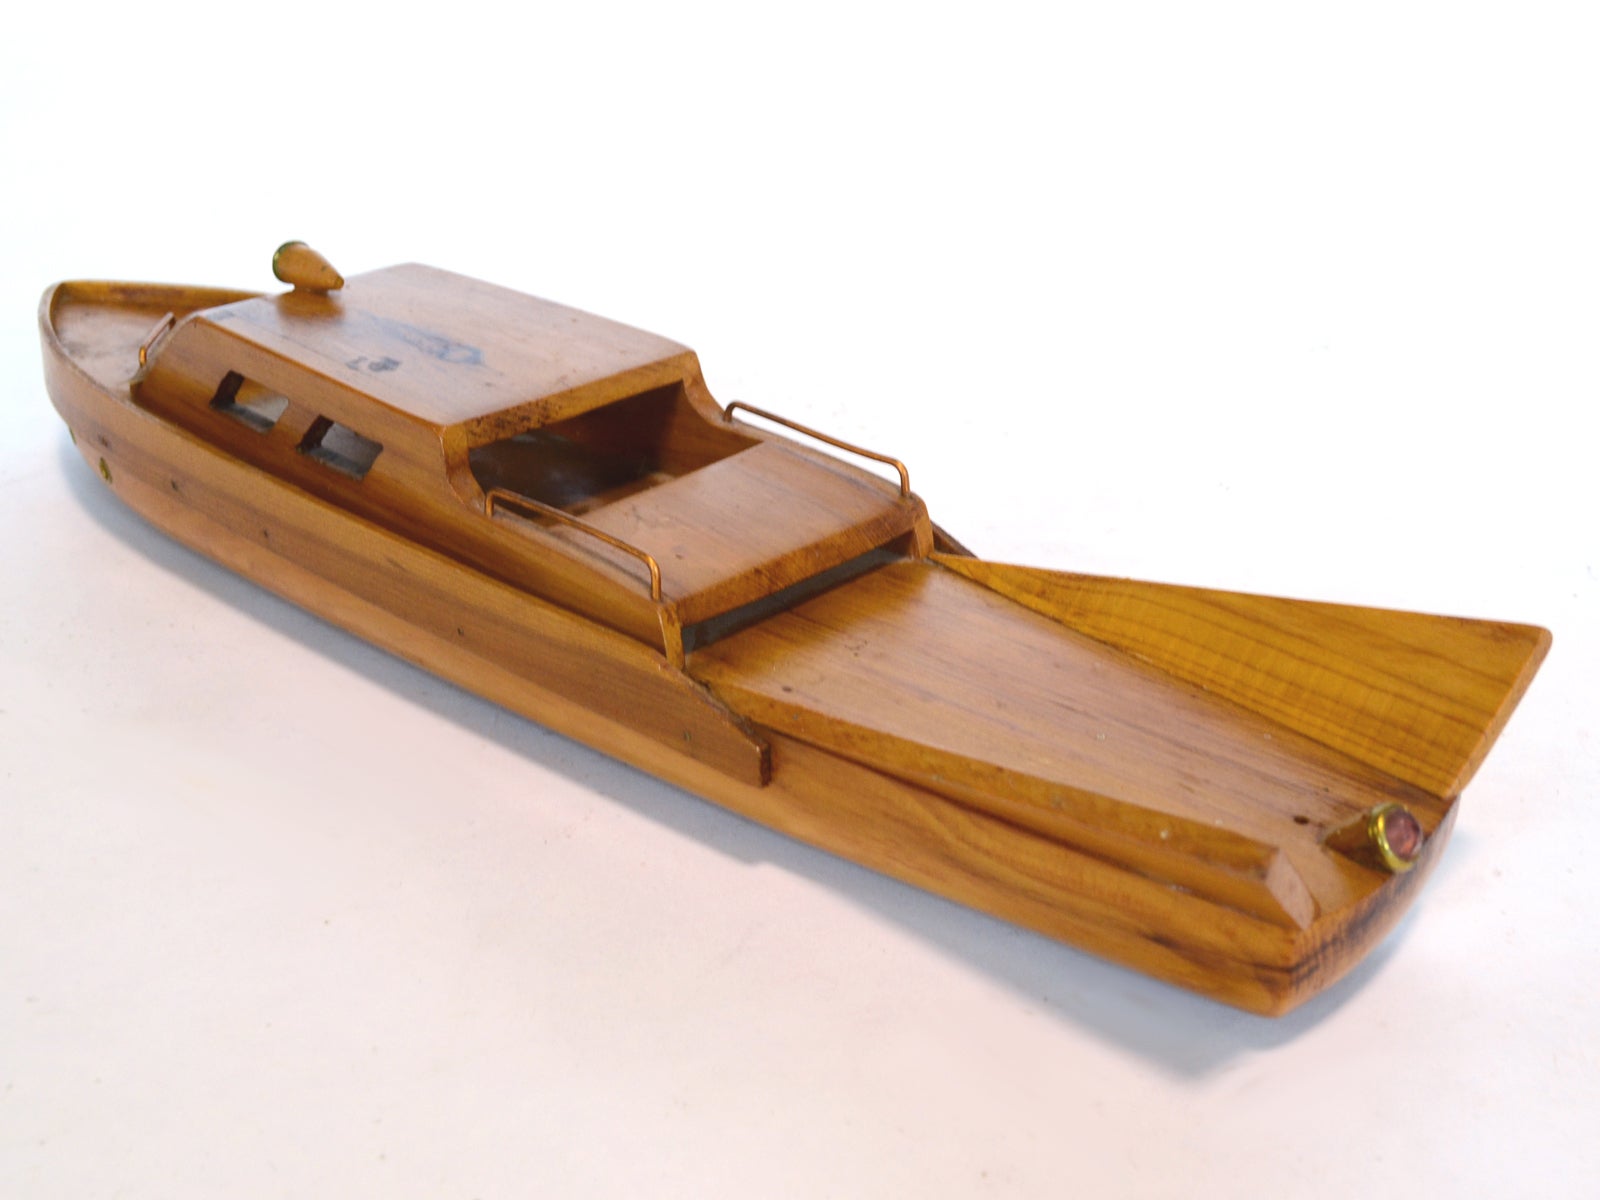 Great wooden model boat from the 1950s